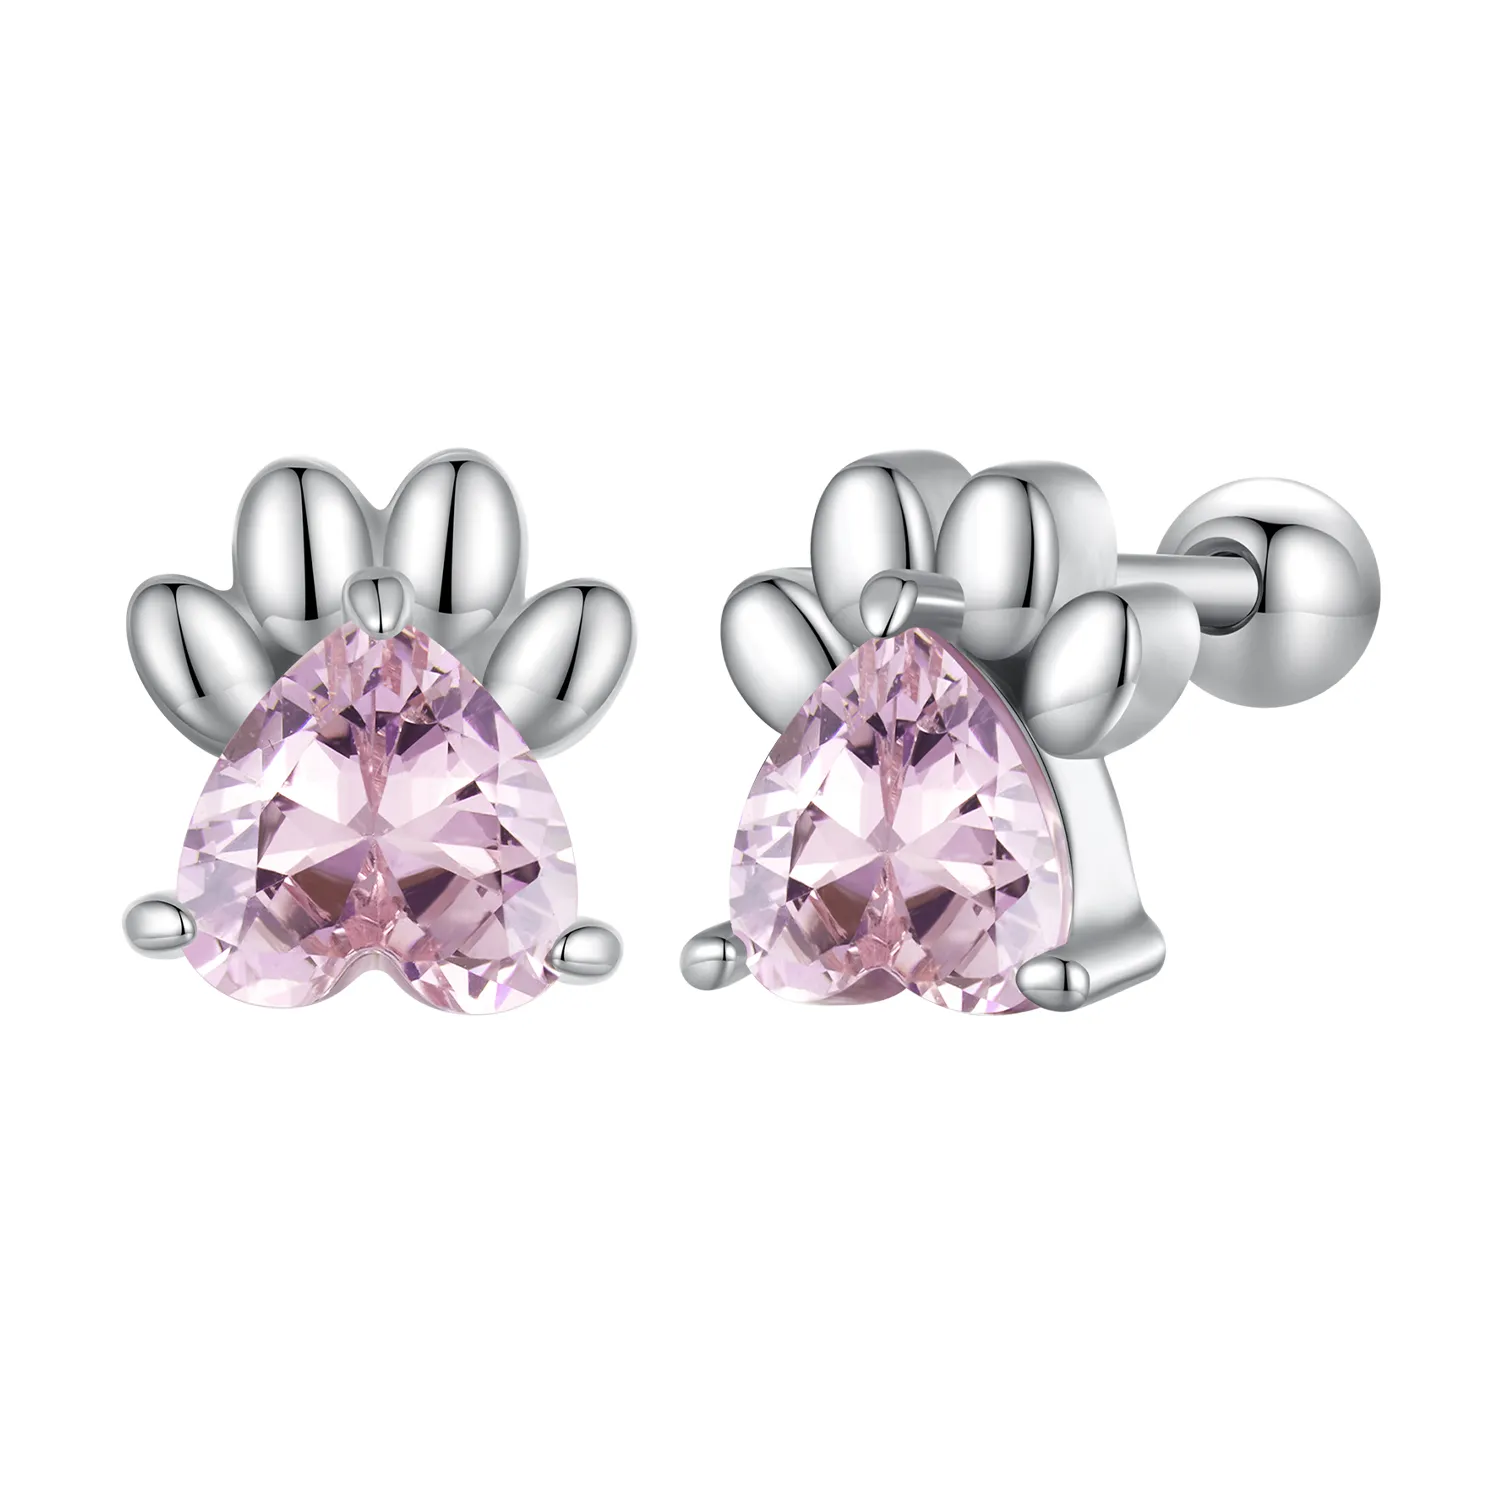 pandora style pink dog paws studs earrings sce1574